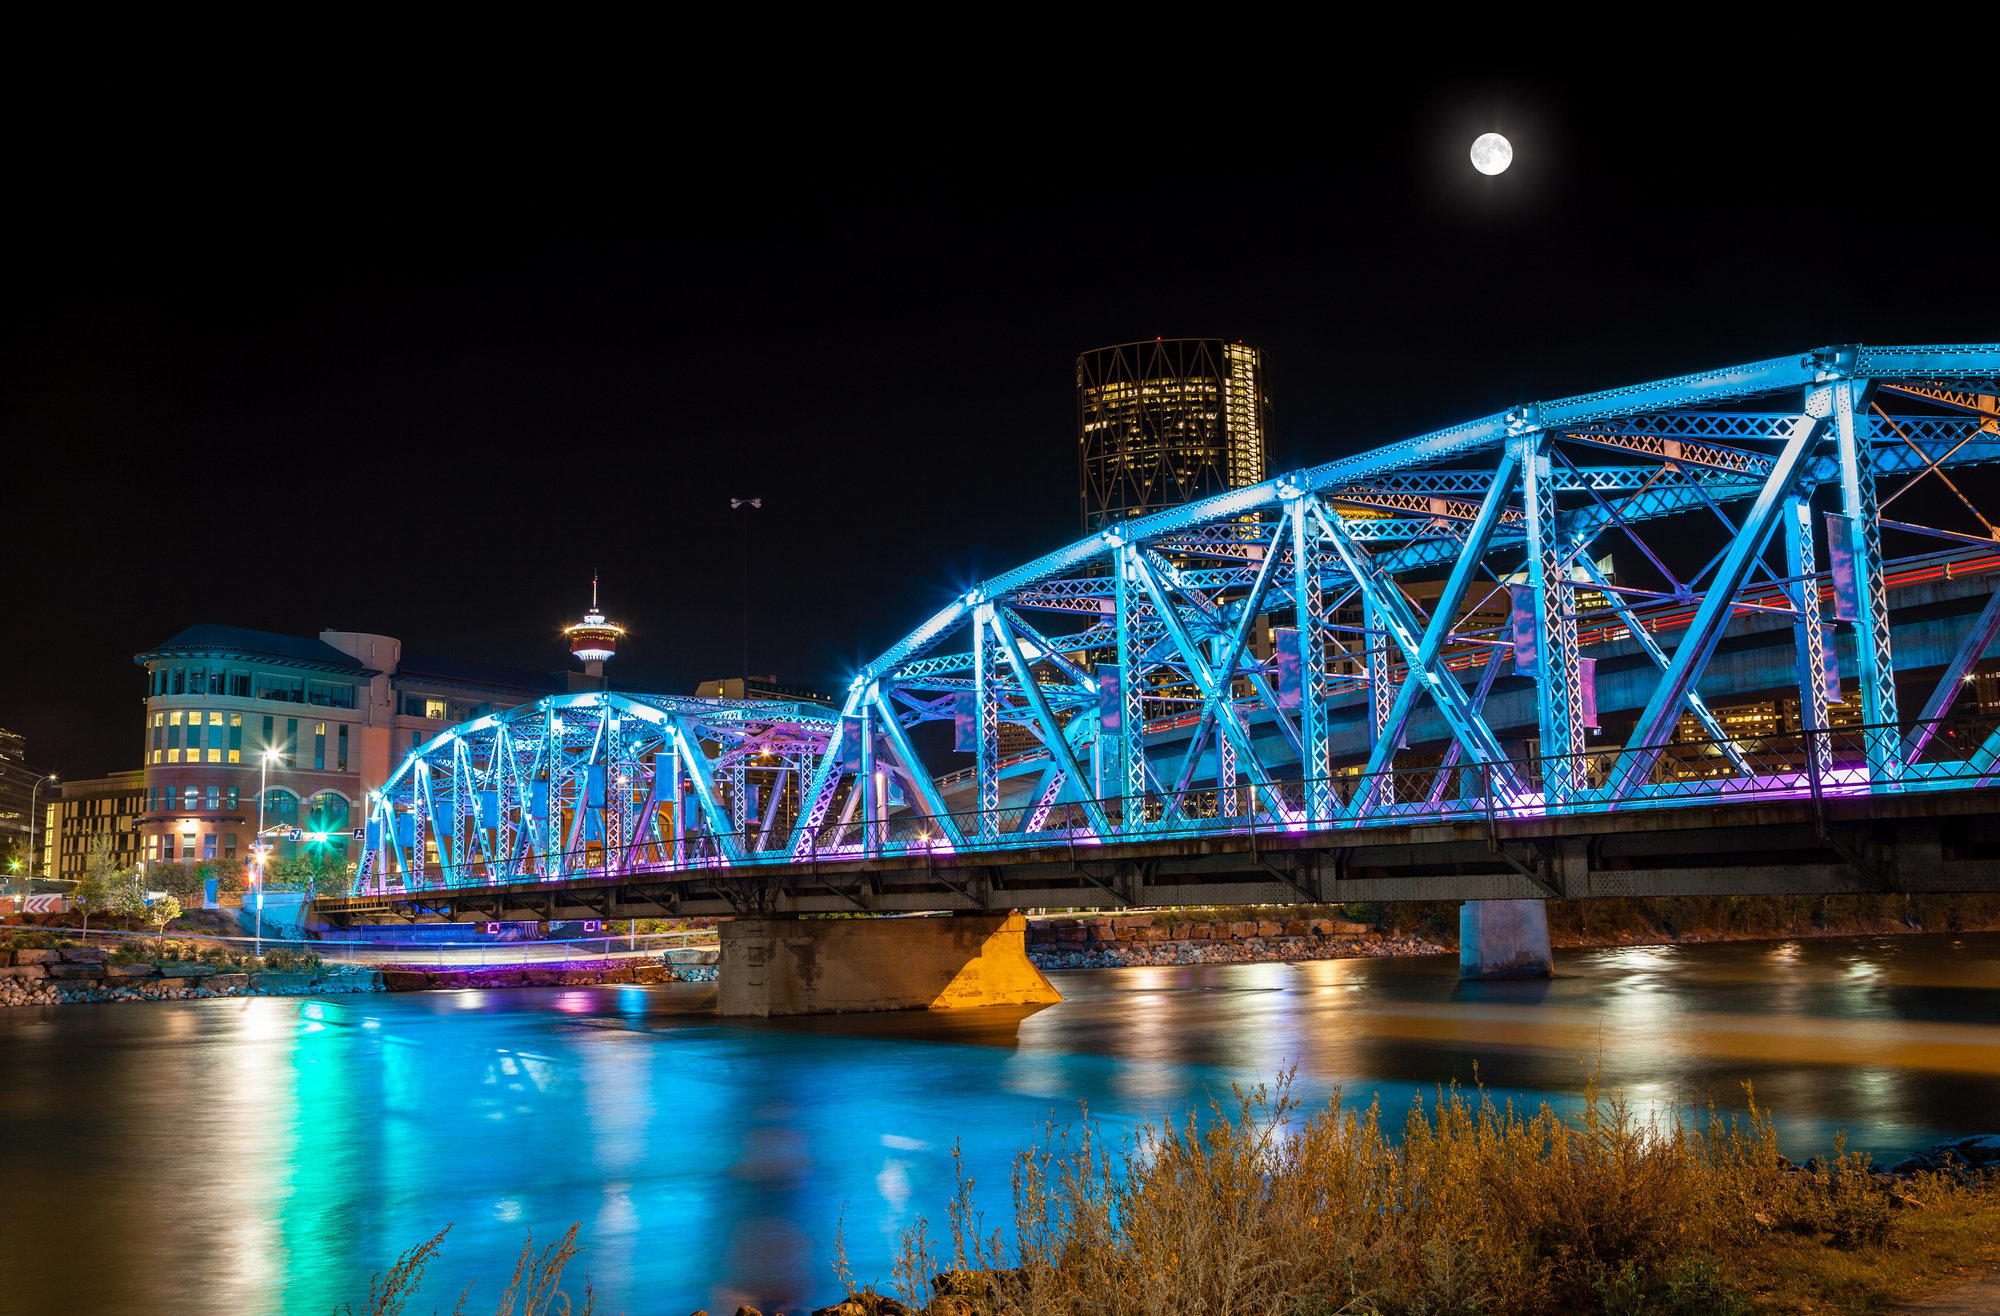 A photograph of the George C King bridge in Calgary, Alberta lit up with blue LED's at night